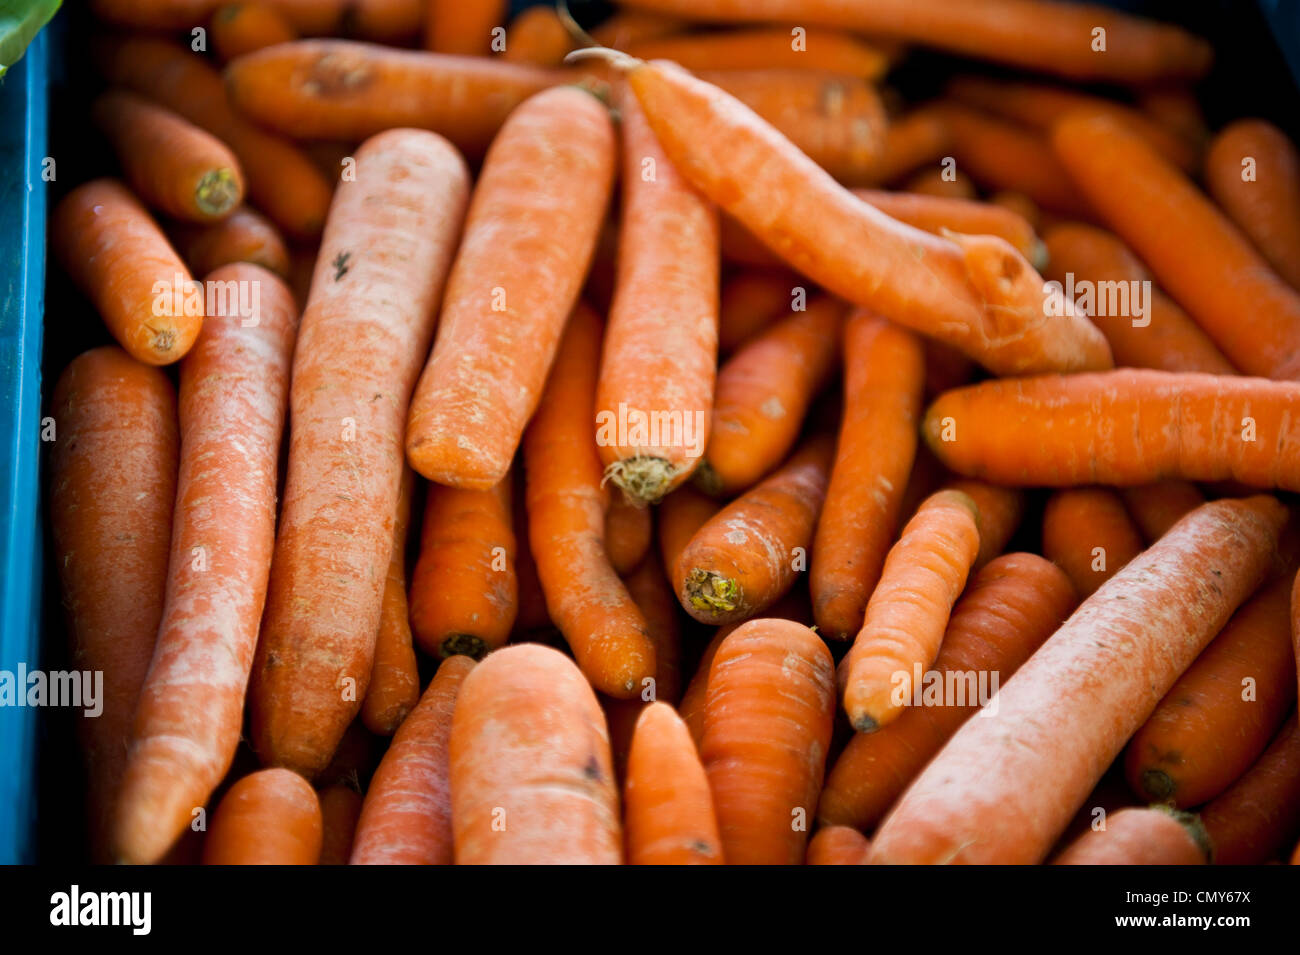 A bunch of organic carrots. Stock Photo